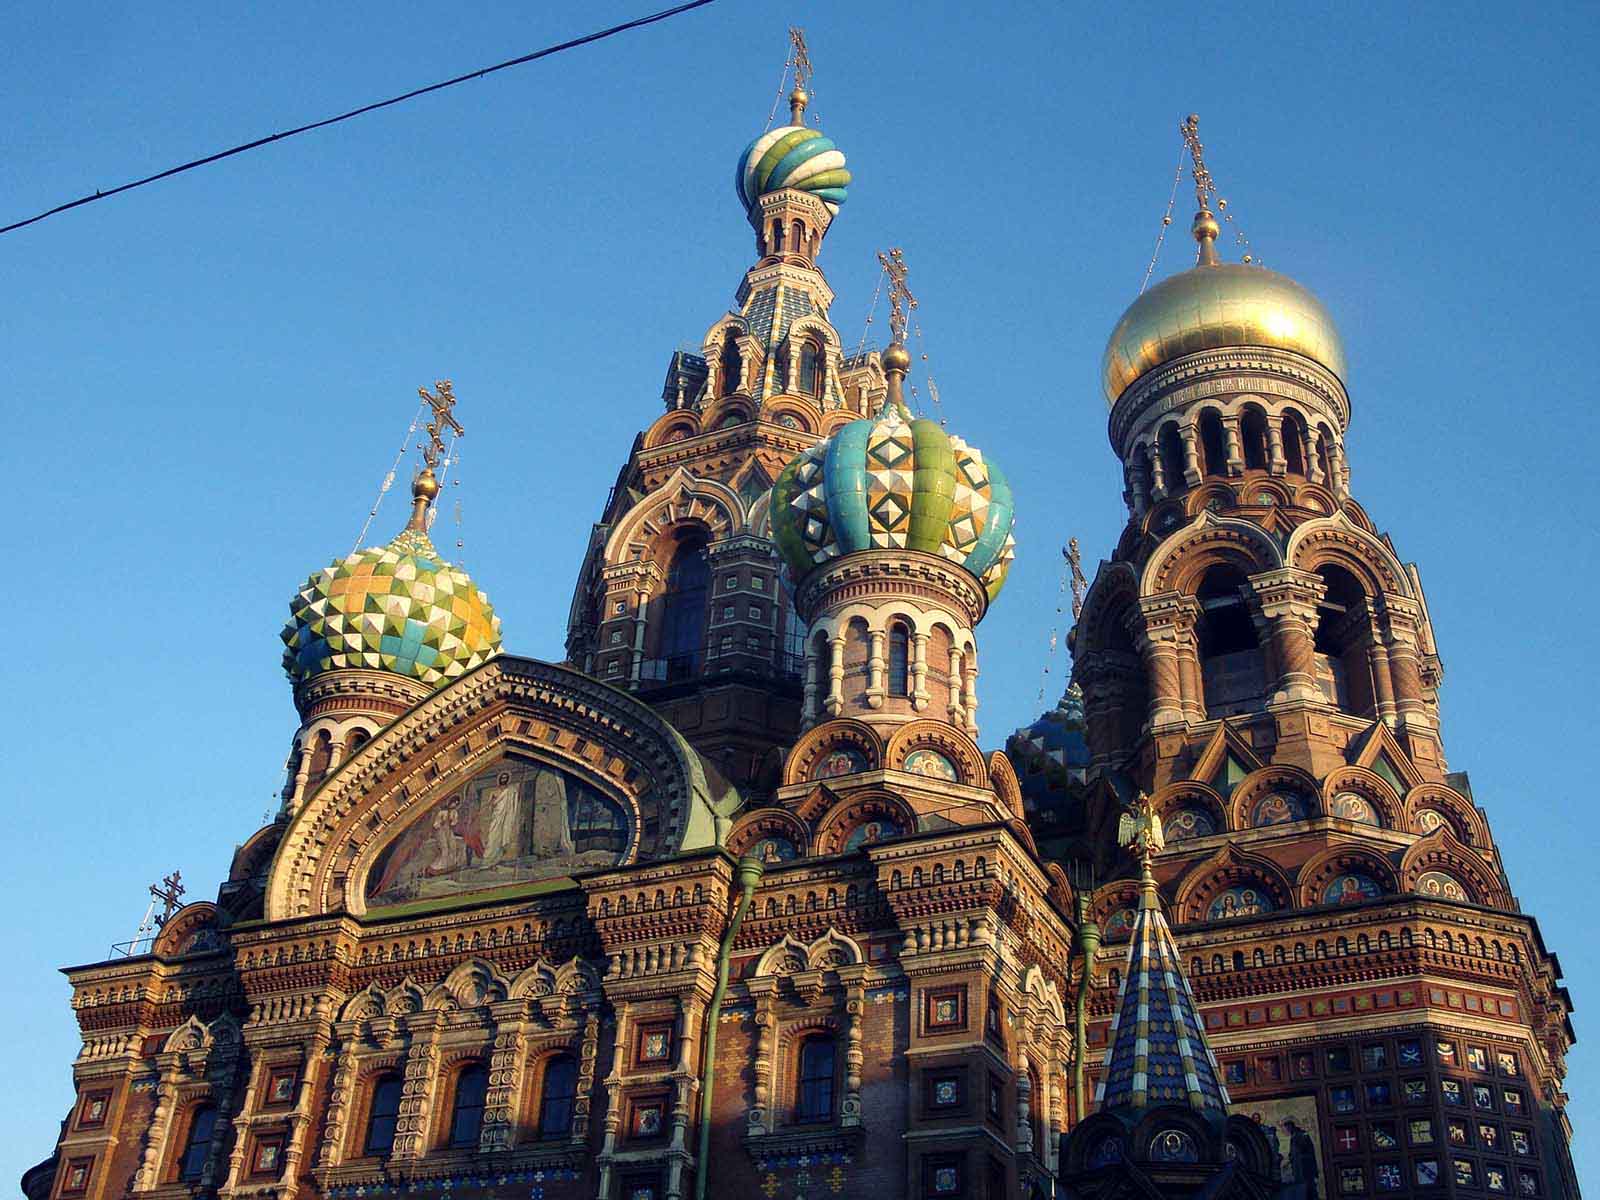 Tour operators in Saint Petersburg, Russia - Foro The Independent Traveller (English)